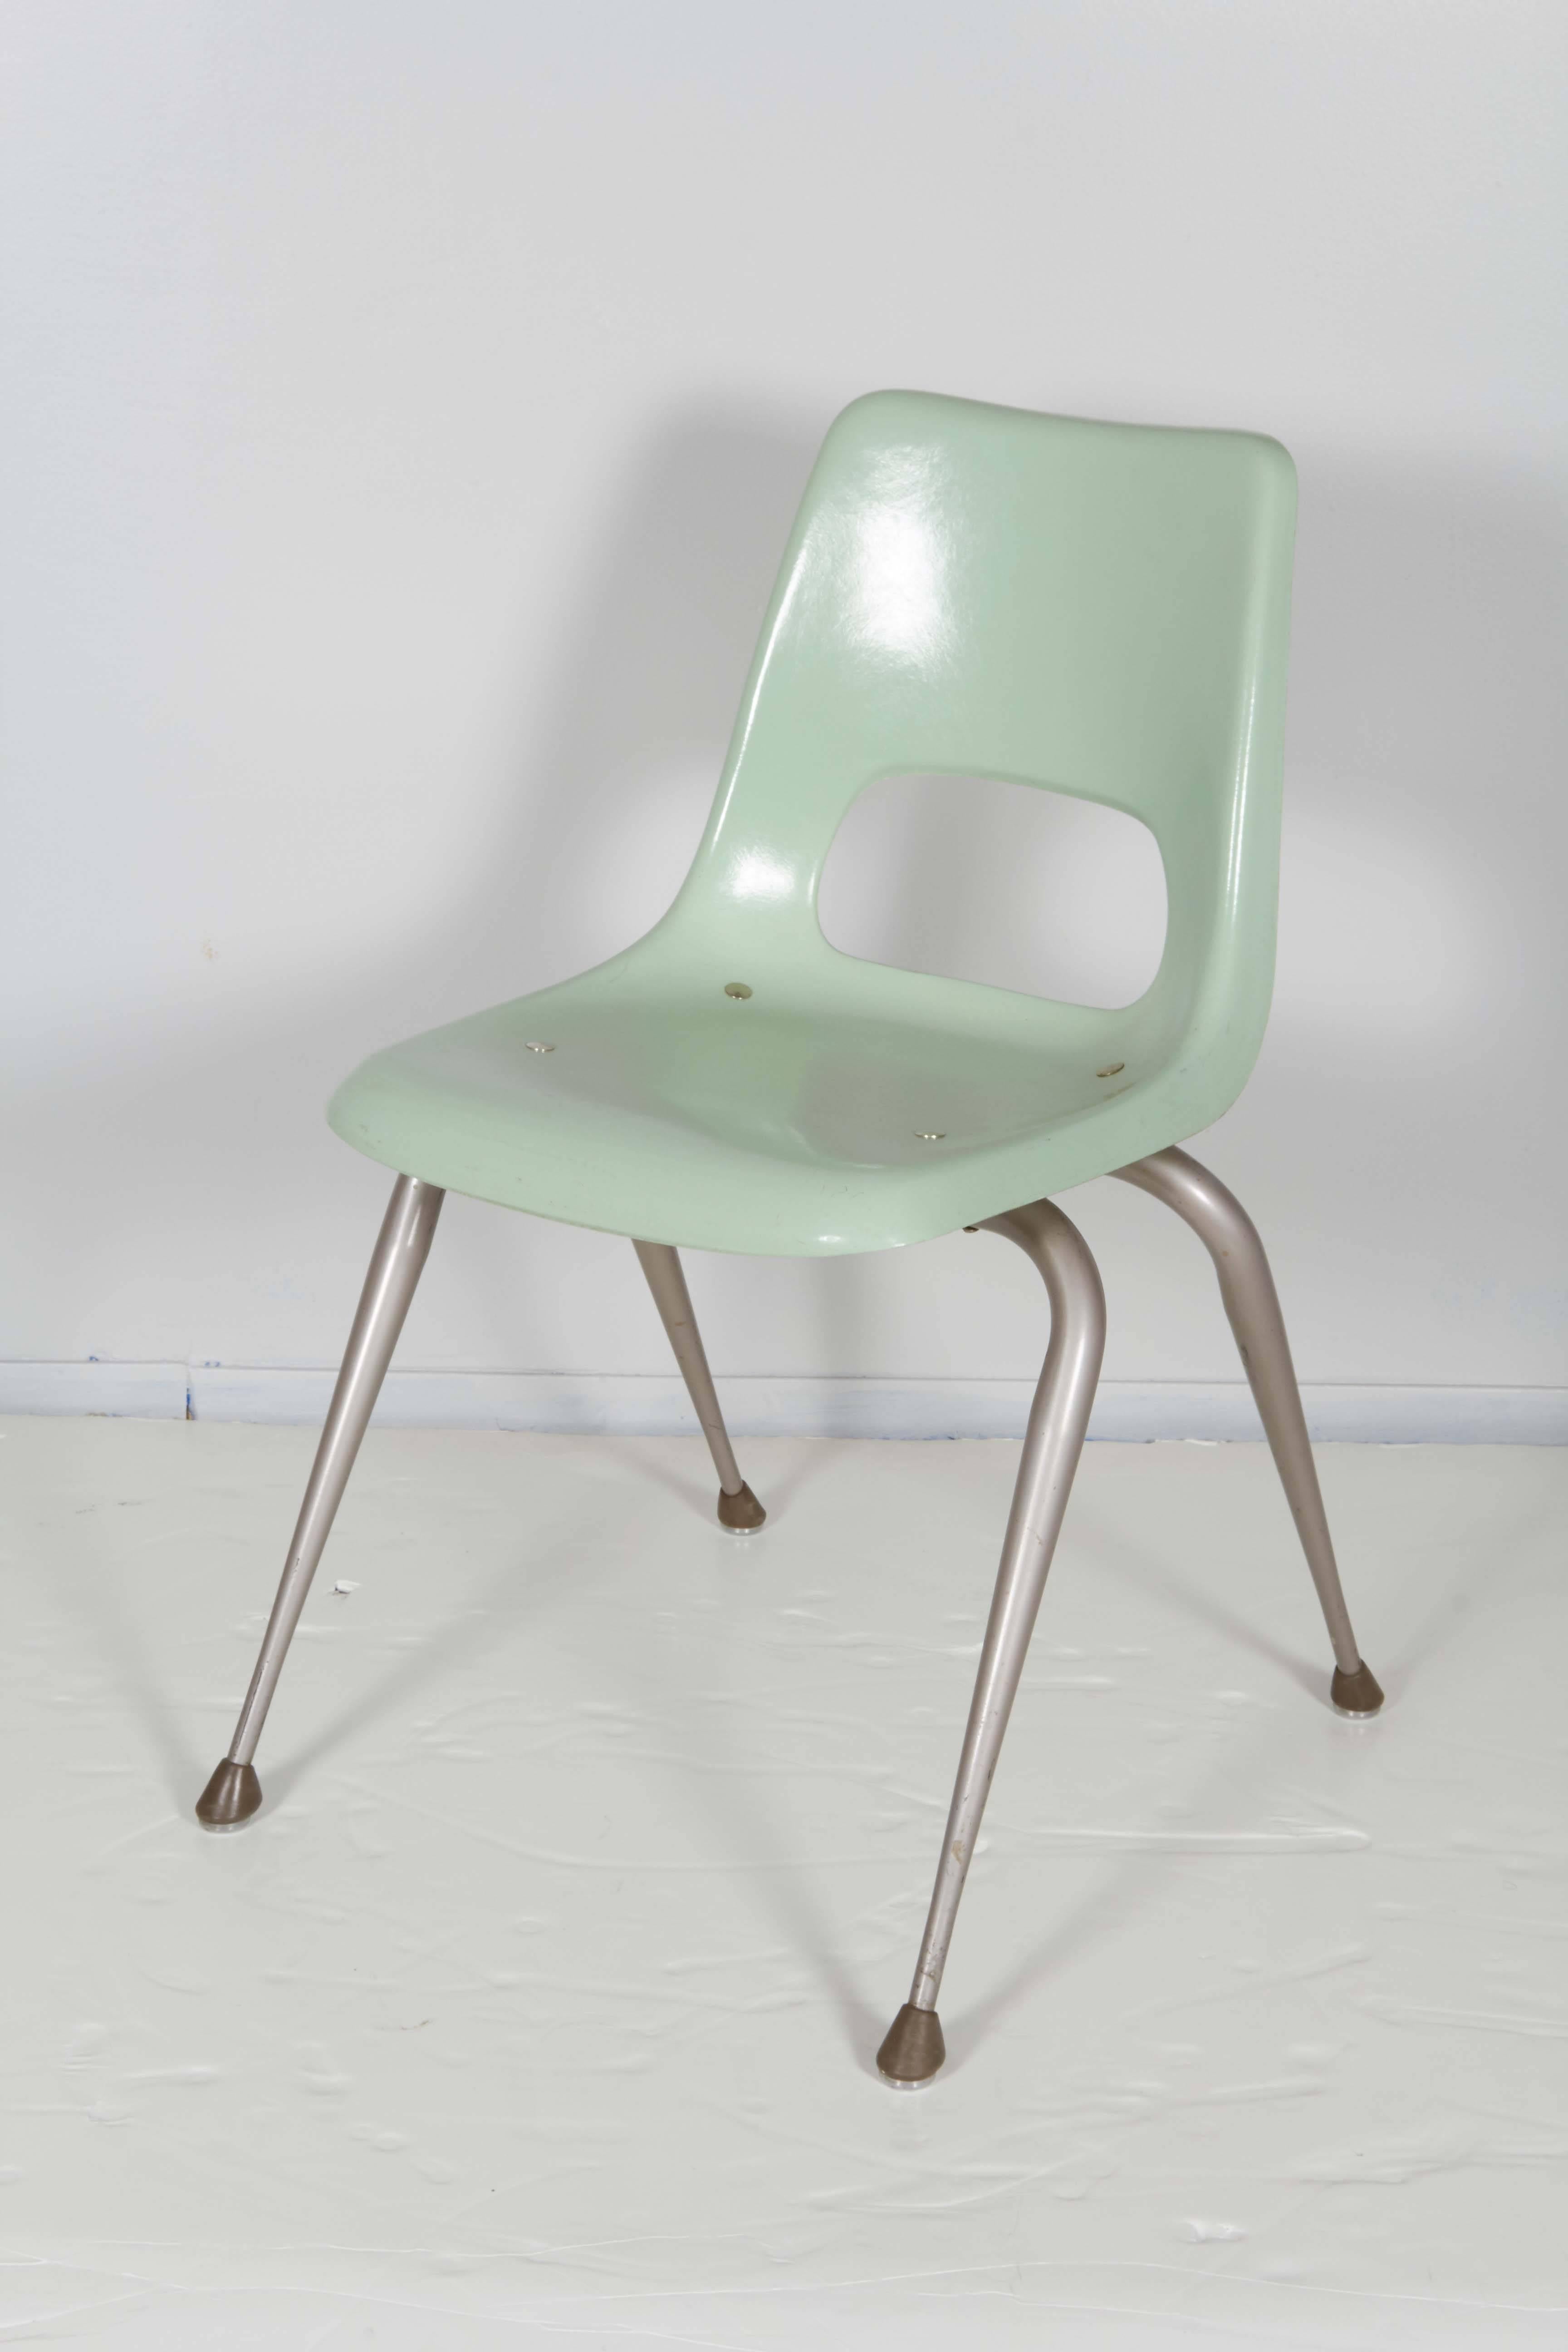 A vintage set of eight chairs by Brunswick, each in mint green molded fiberglass on metal legs. Includes maker's mark [B/Brunswick] indicating manufacturer. The chairs remain in good vintage condition, with age appropriate wear.